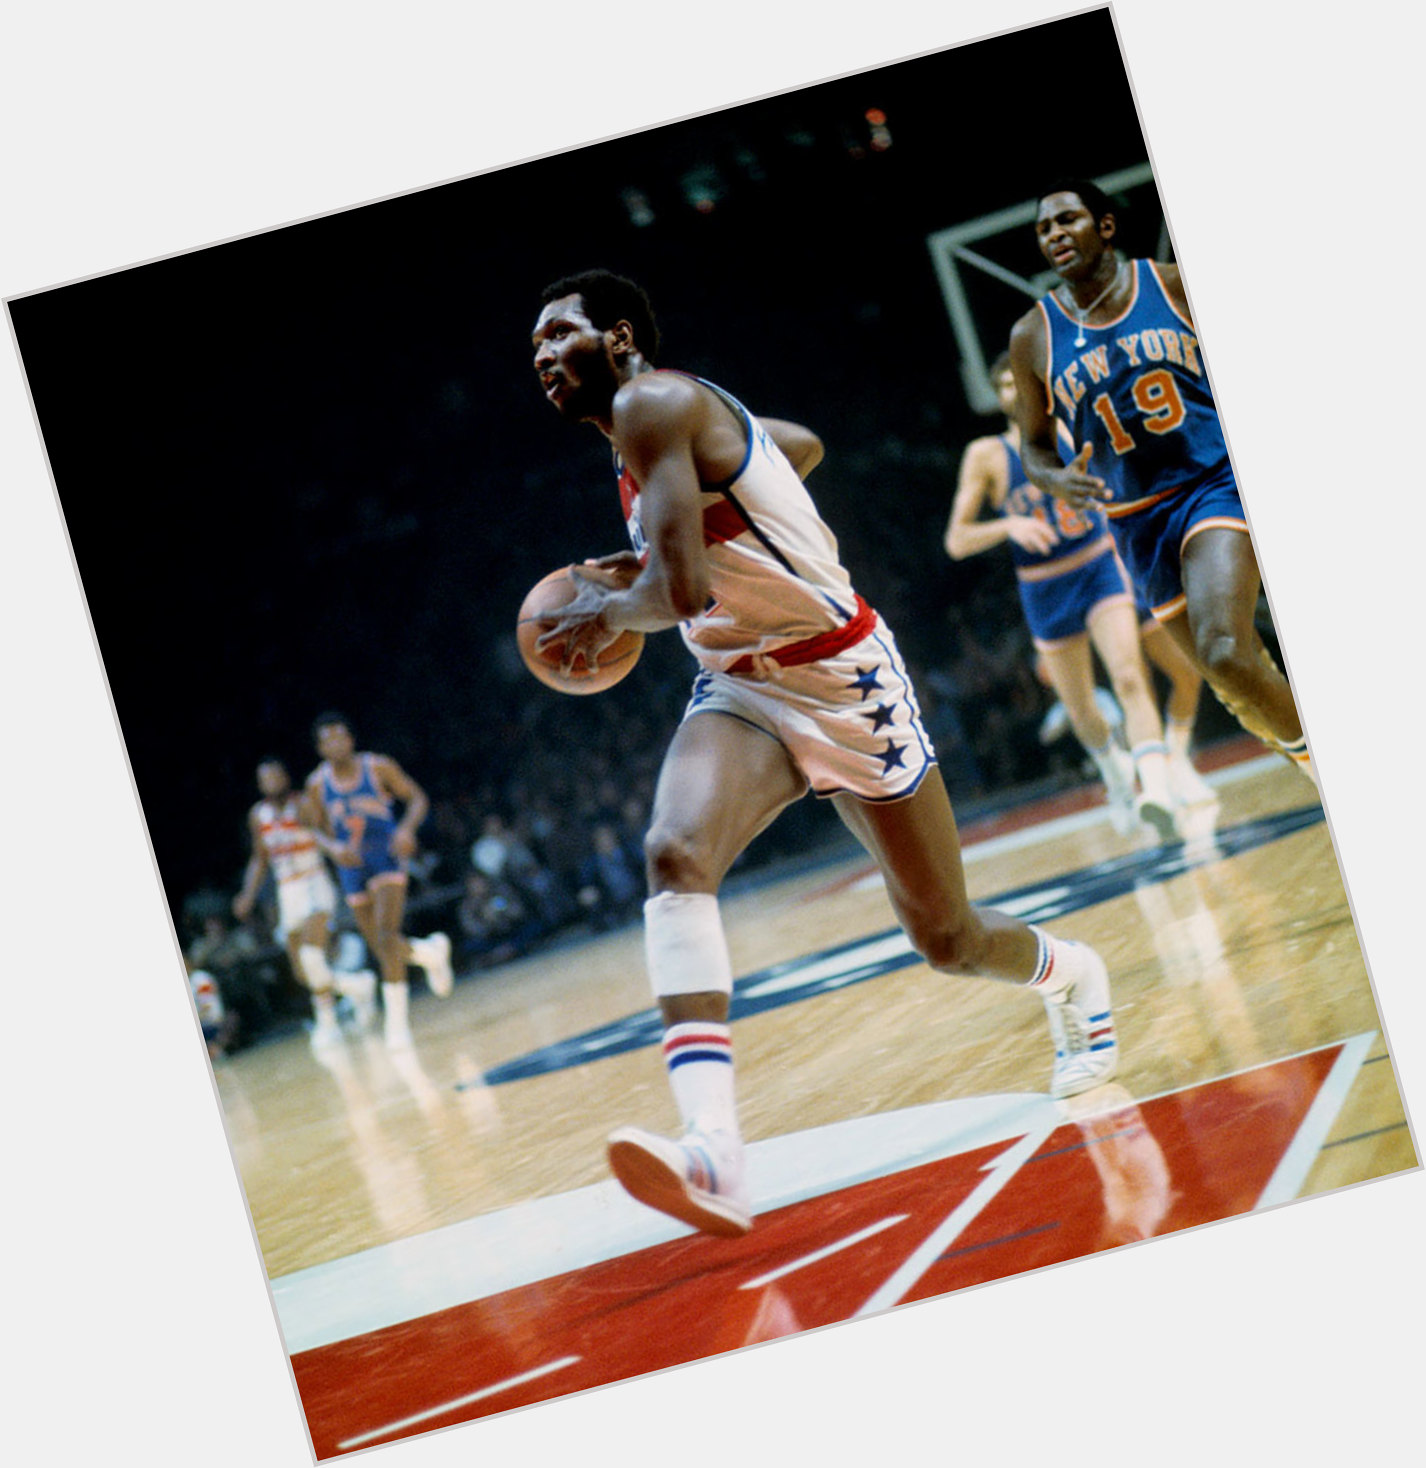 <a href="/hot-men/elvin-hayes/where-dating-news-photos">Elvin Hayes</a>  